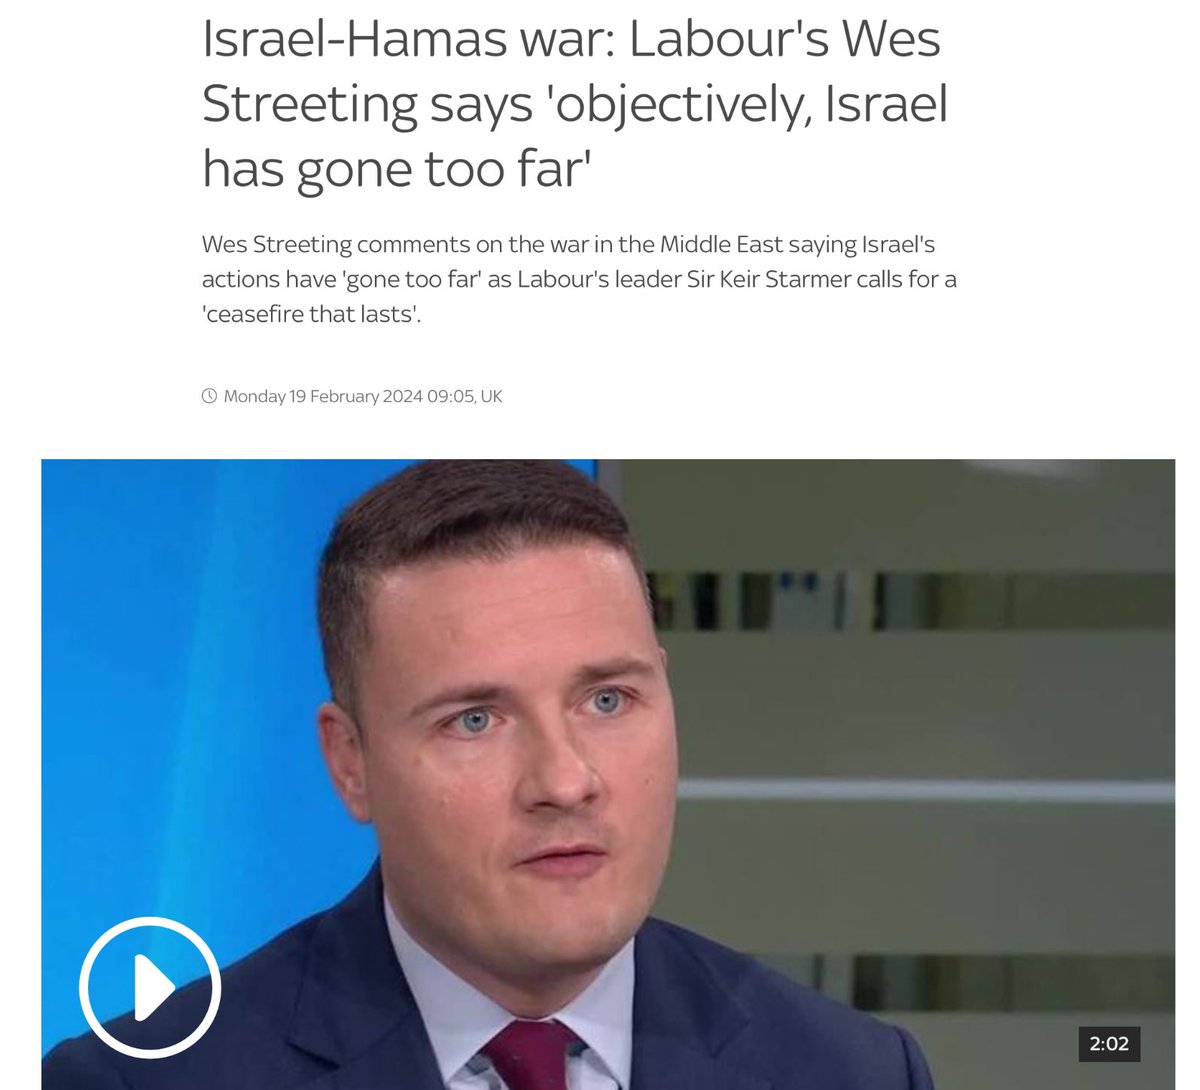 So @Keir_Starmer #WesStreeting knew cutting off power/water/bombing hospitals were #IsraeliWarCrimes But Israeli lobby money bought their compliance Now they U-turn But it’s fear of losing votes, not morality that swung them A small victory but too late for #Gaza_Genocide